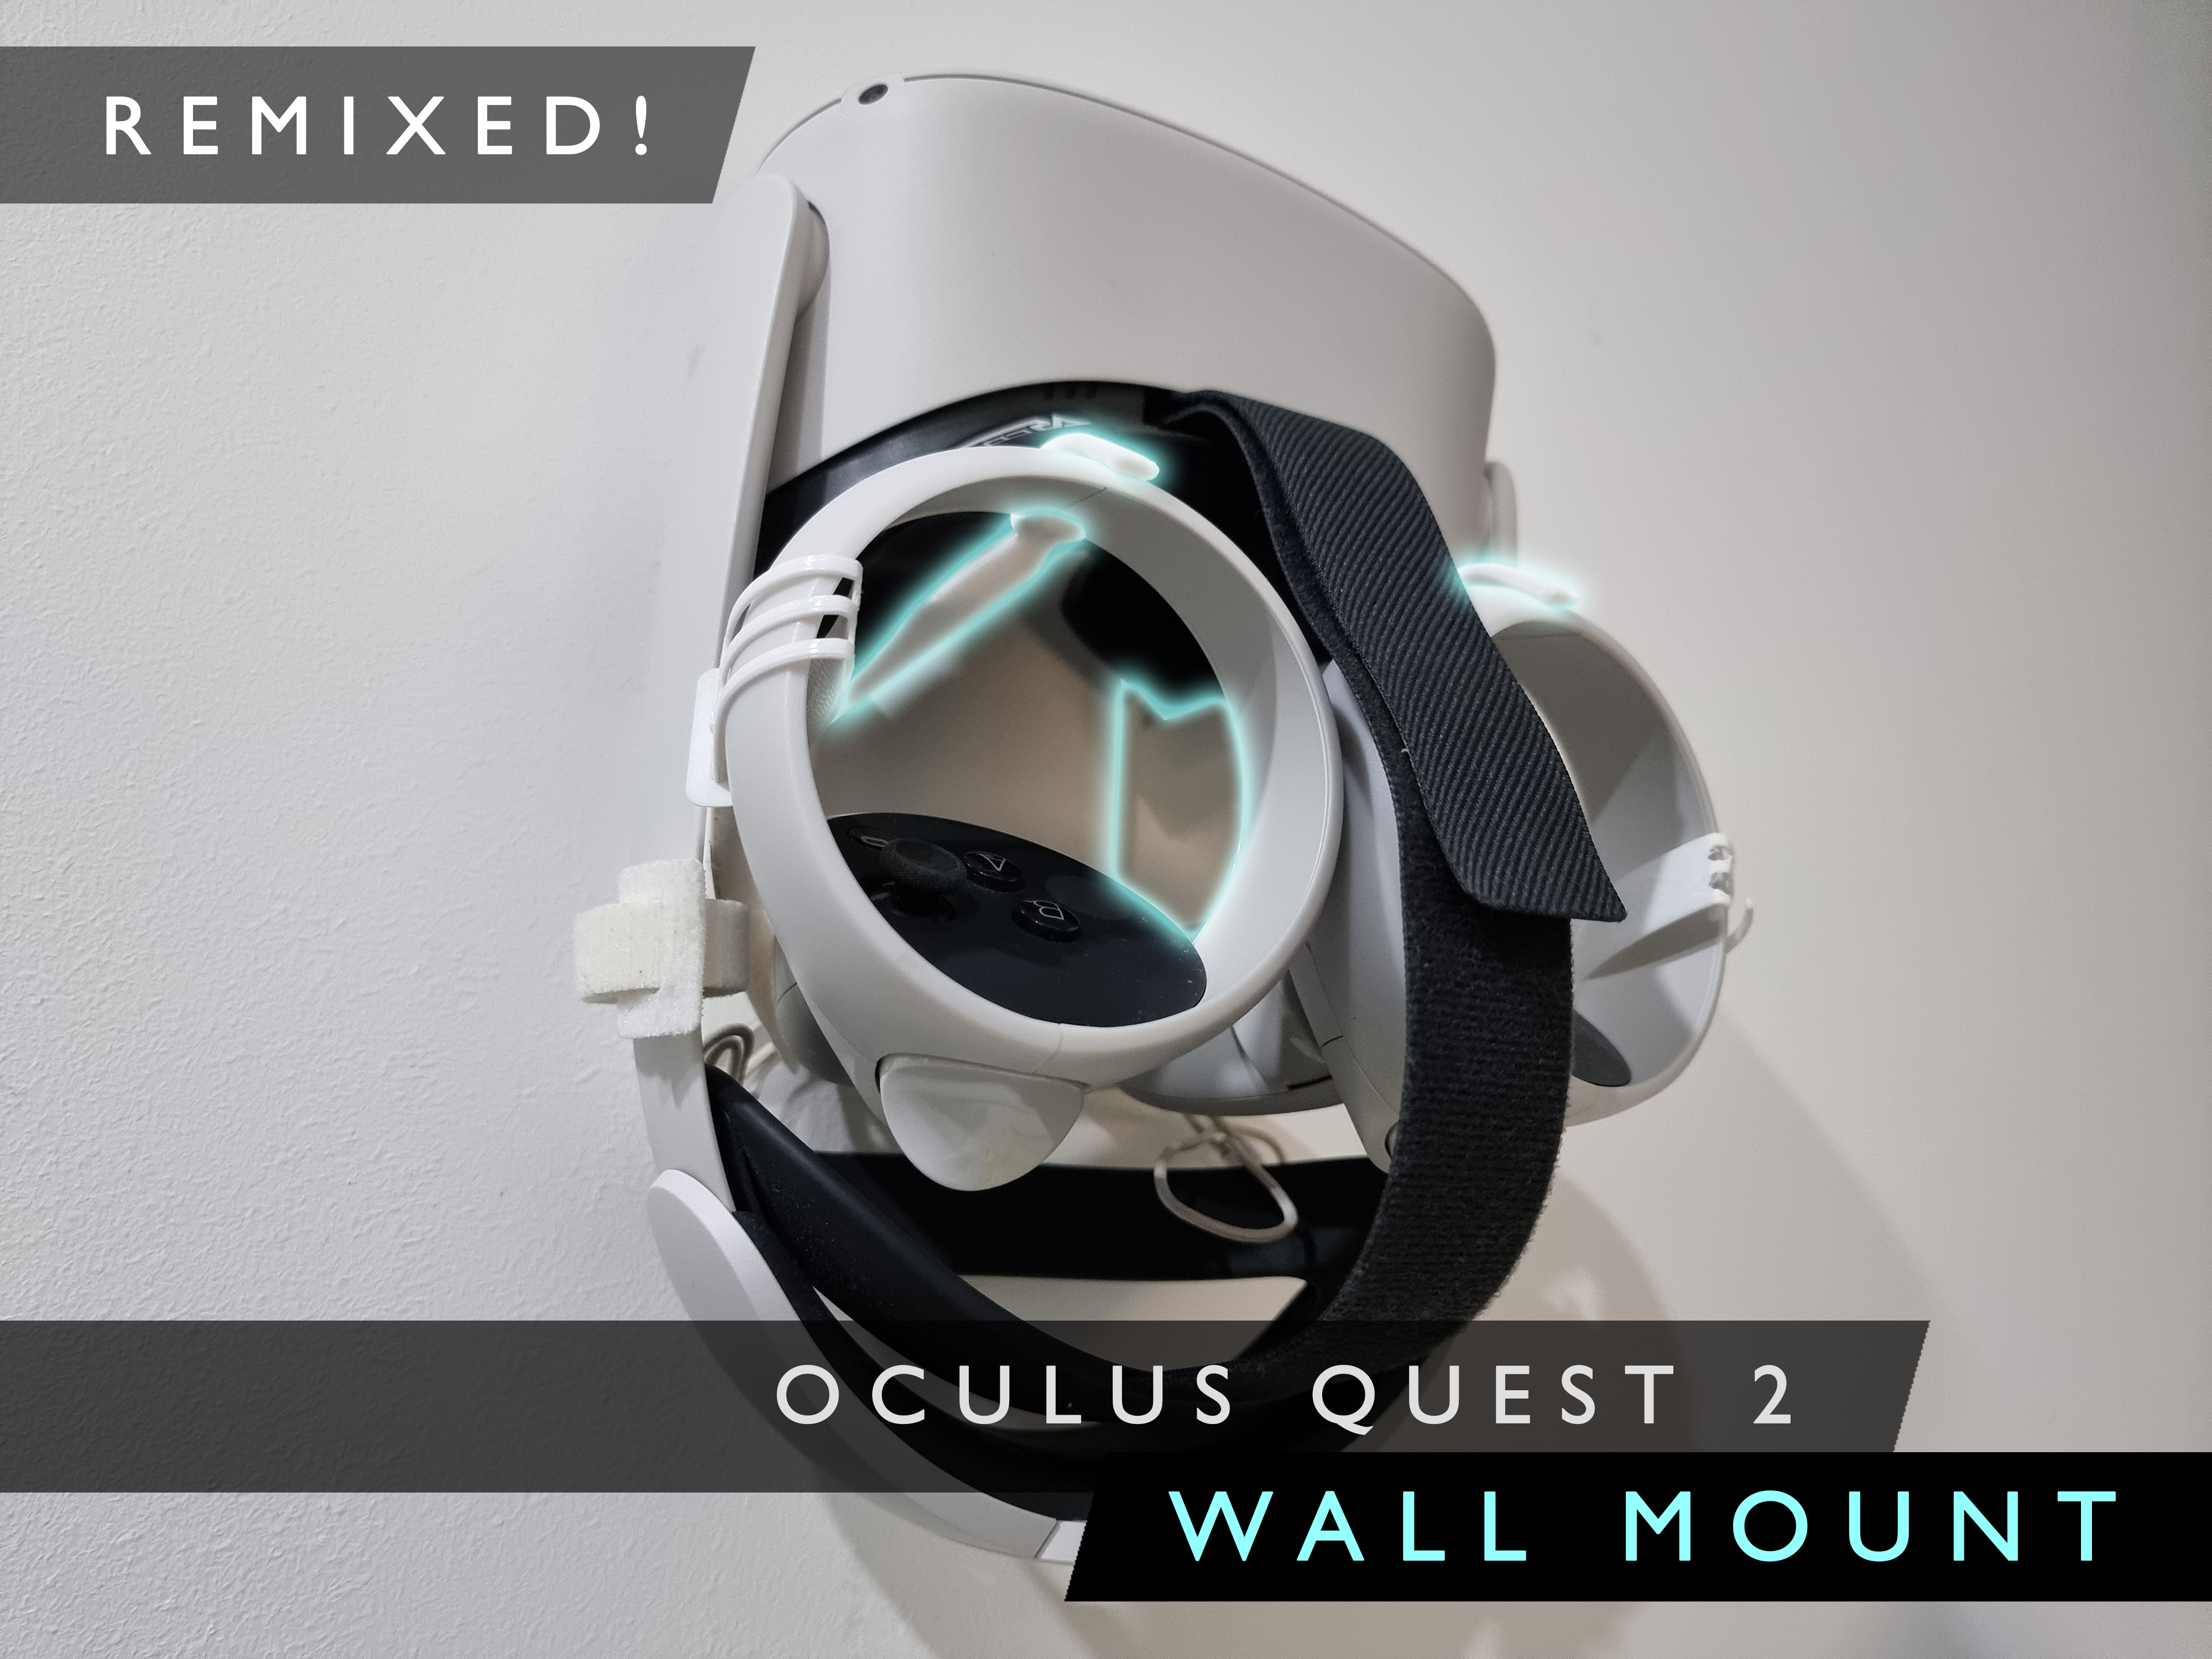 Oculus Quest 2 Wall Mount - Tape Edition